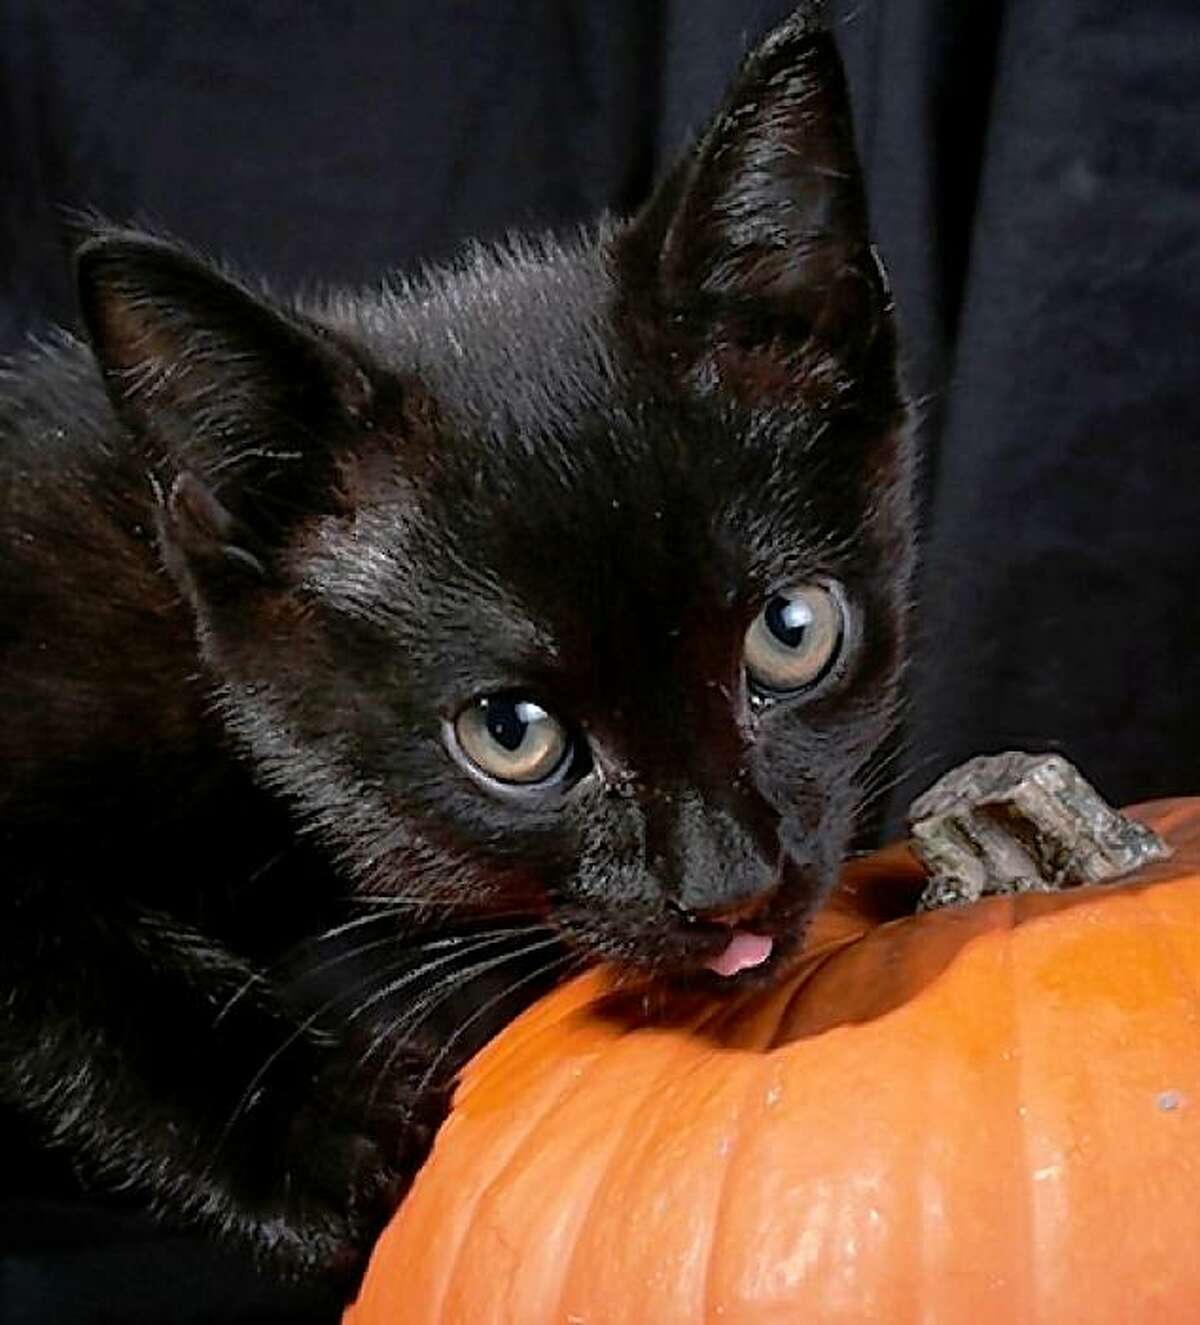 Halloween pet threats / Urban legends vs. reality -- are your pets safe?